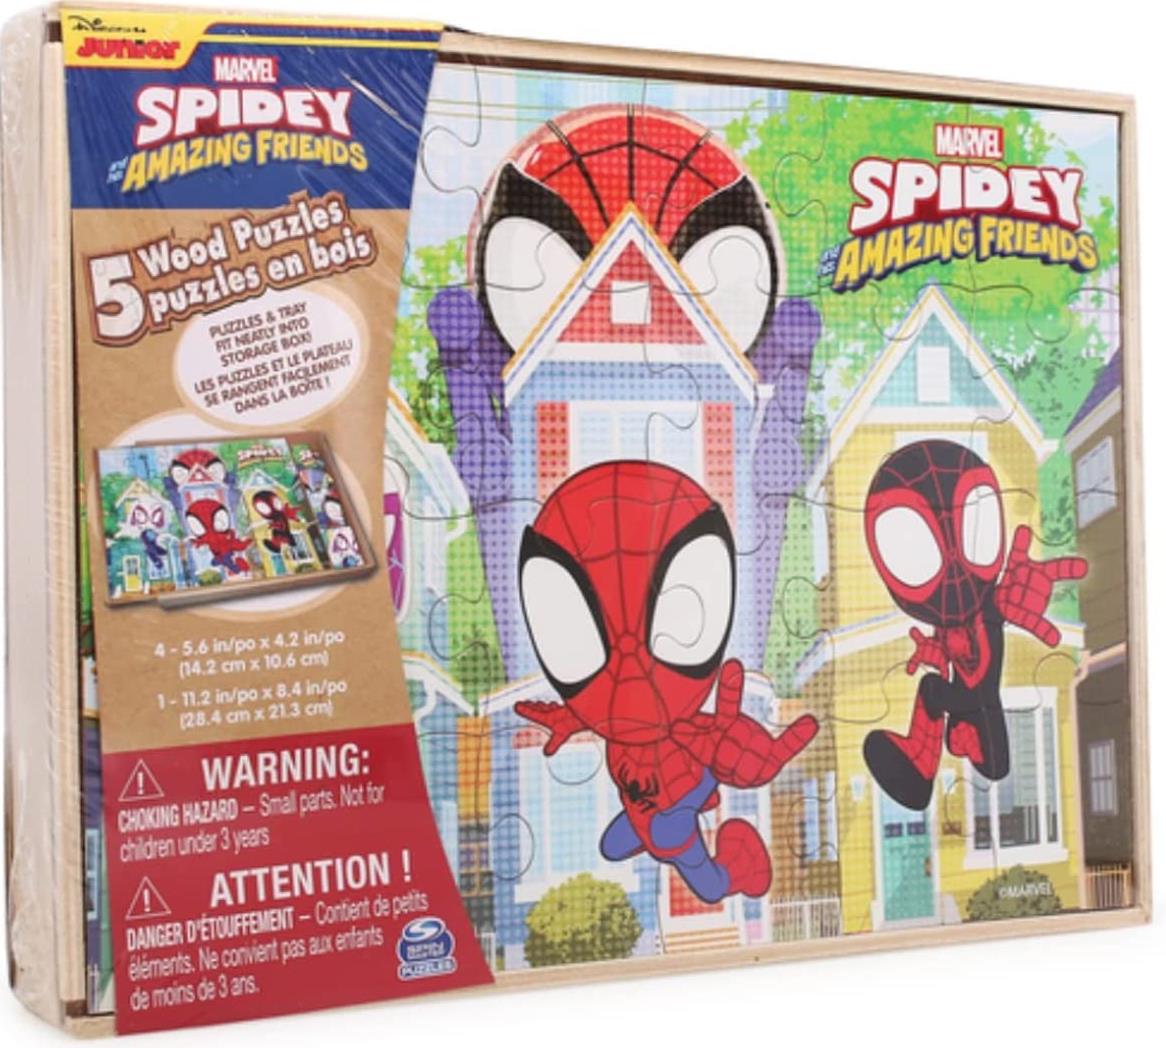 Disney Junior Marvel Spider-Man Spidey Amazing Friends - Set of 5 Wood Puzzles with Storage Box for Kids - Ages 4 and Up BQ7L6PU

https://t.co/asSEN1yBaB https://t.co/60MnGee7eN